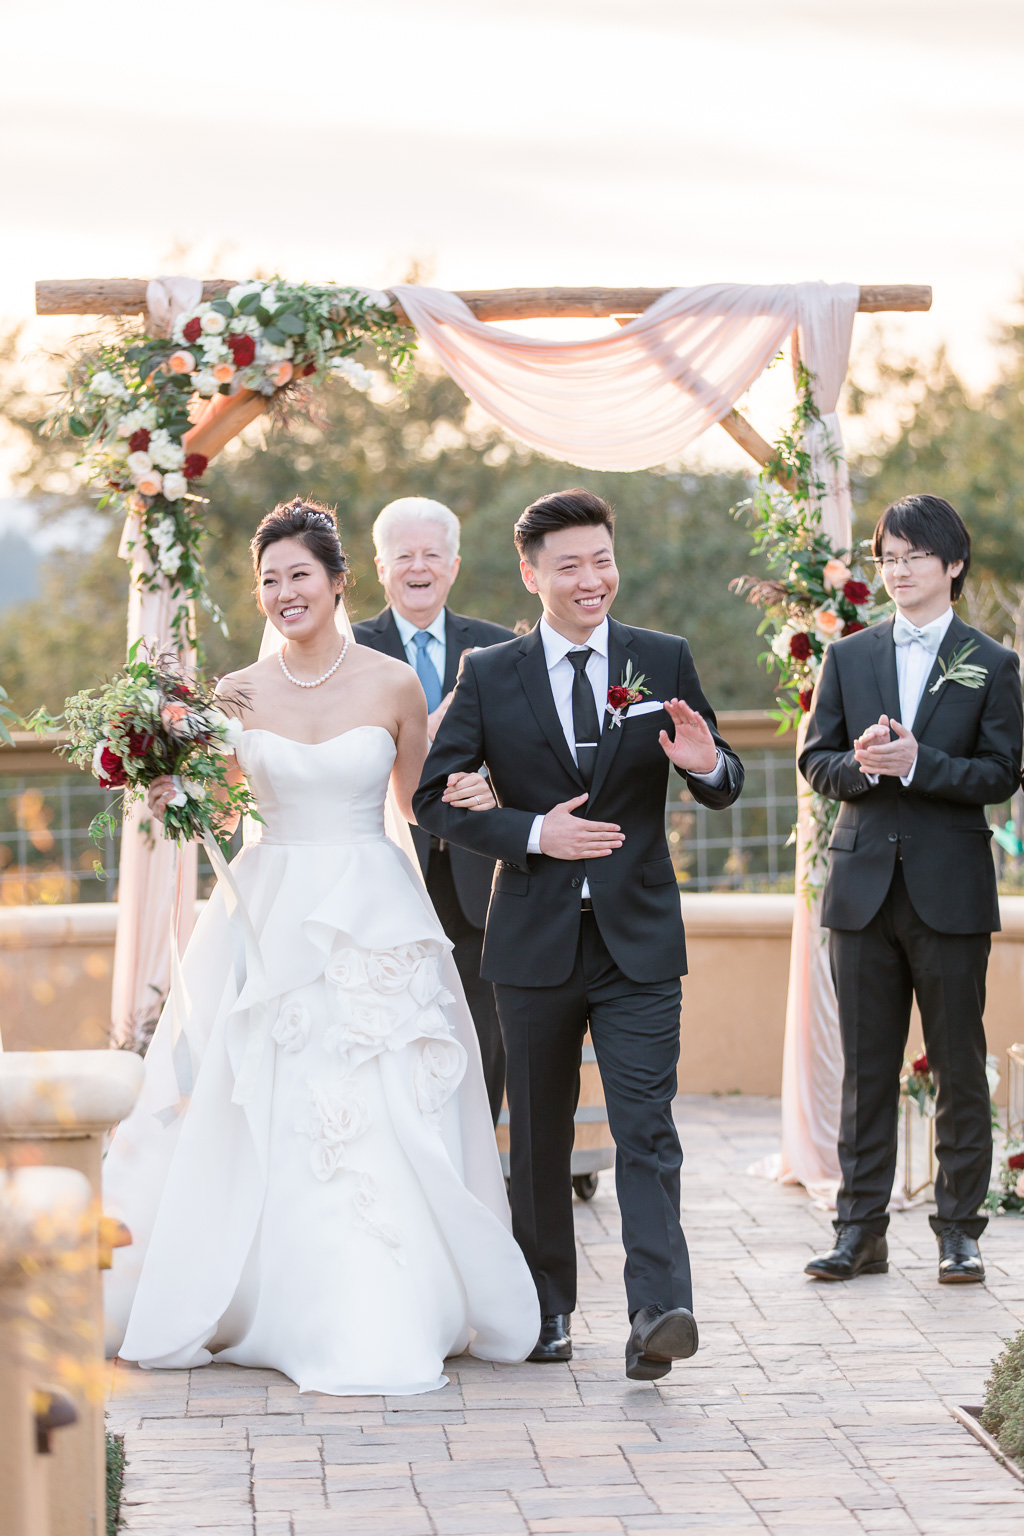 waving at their guests at the end of the ceremony